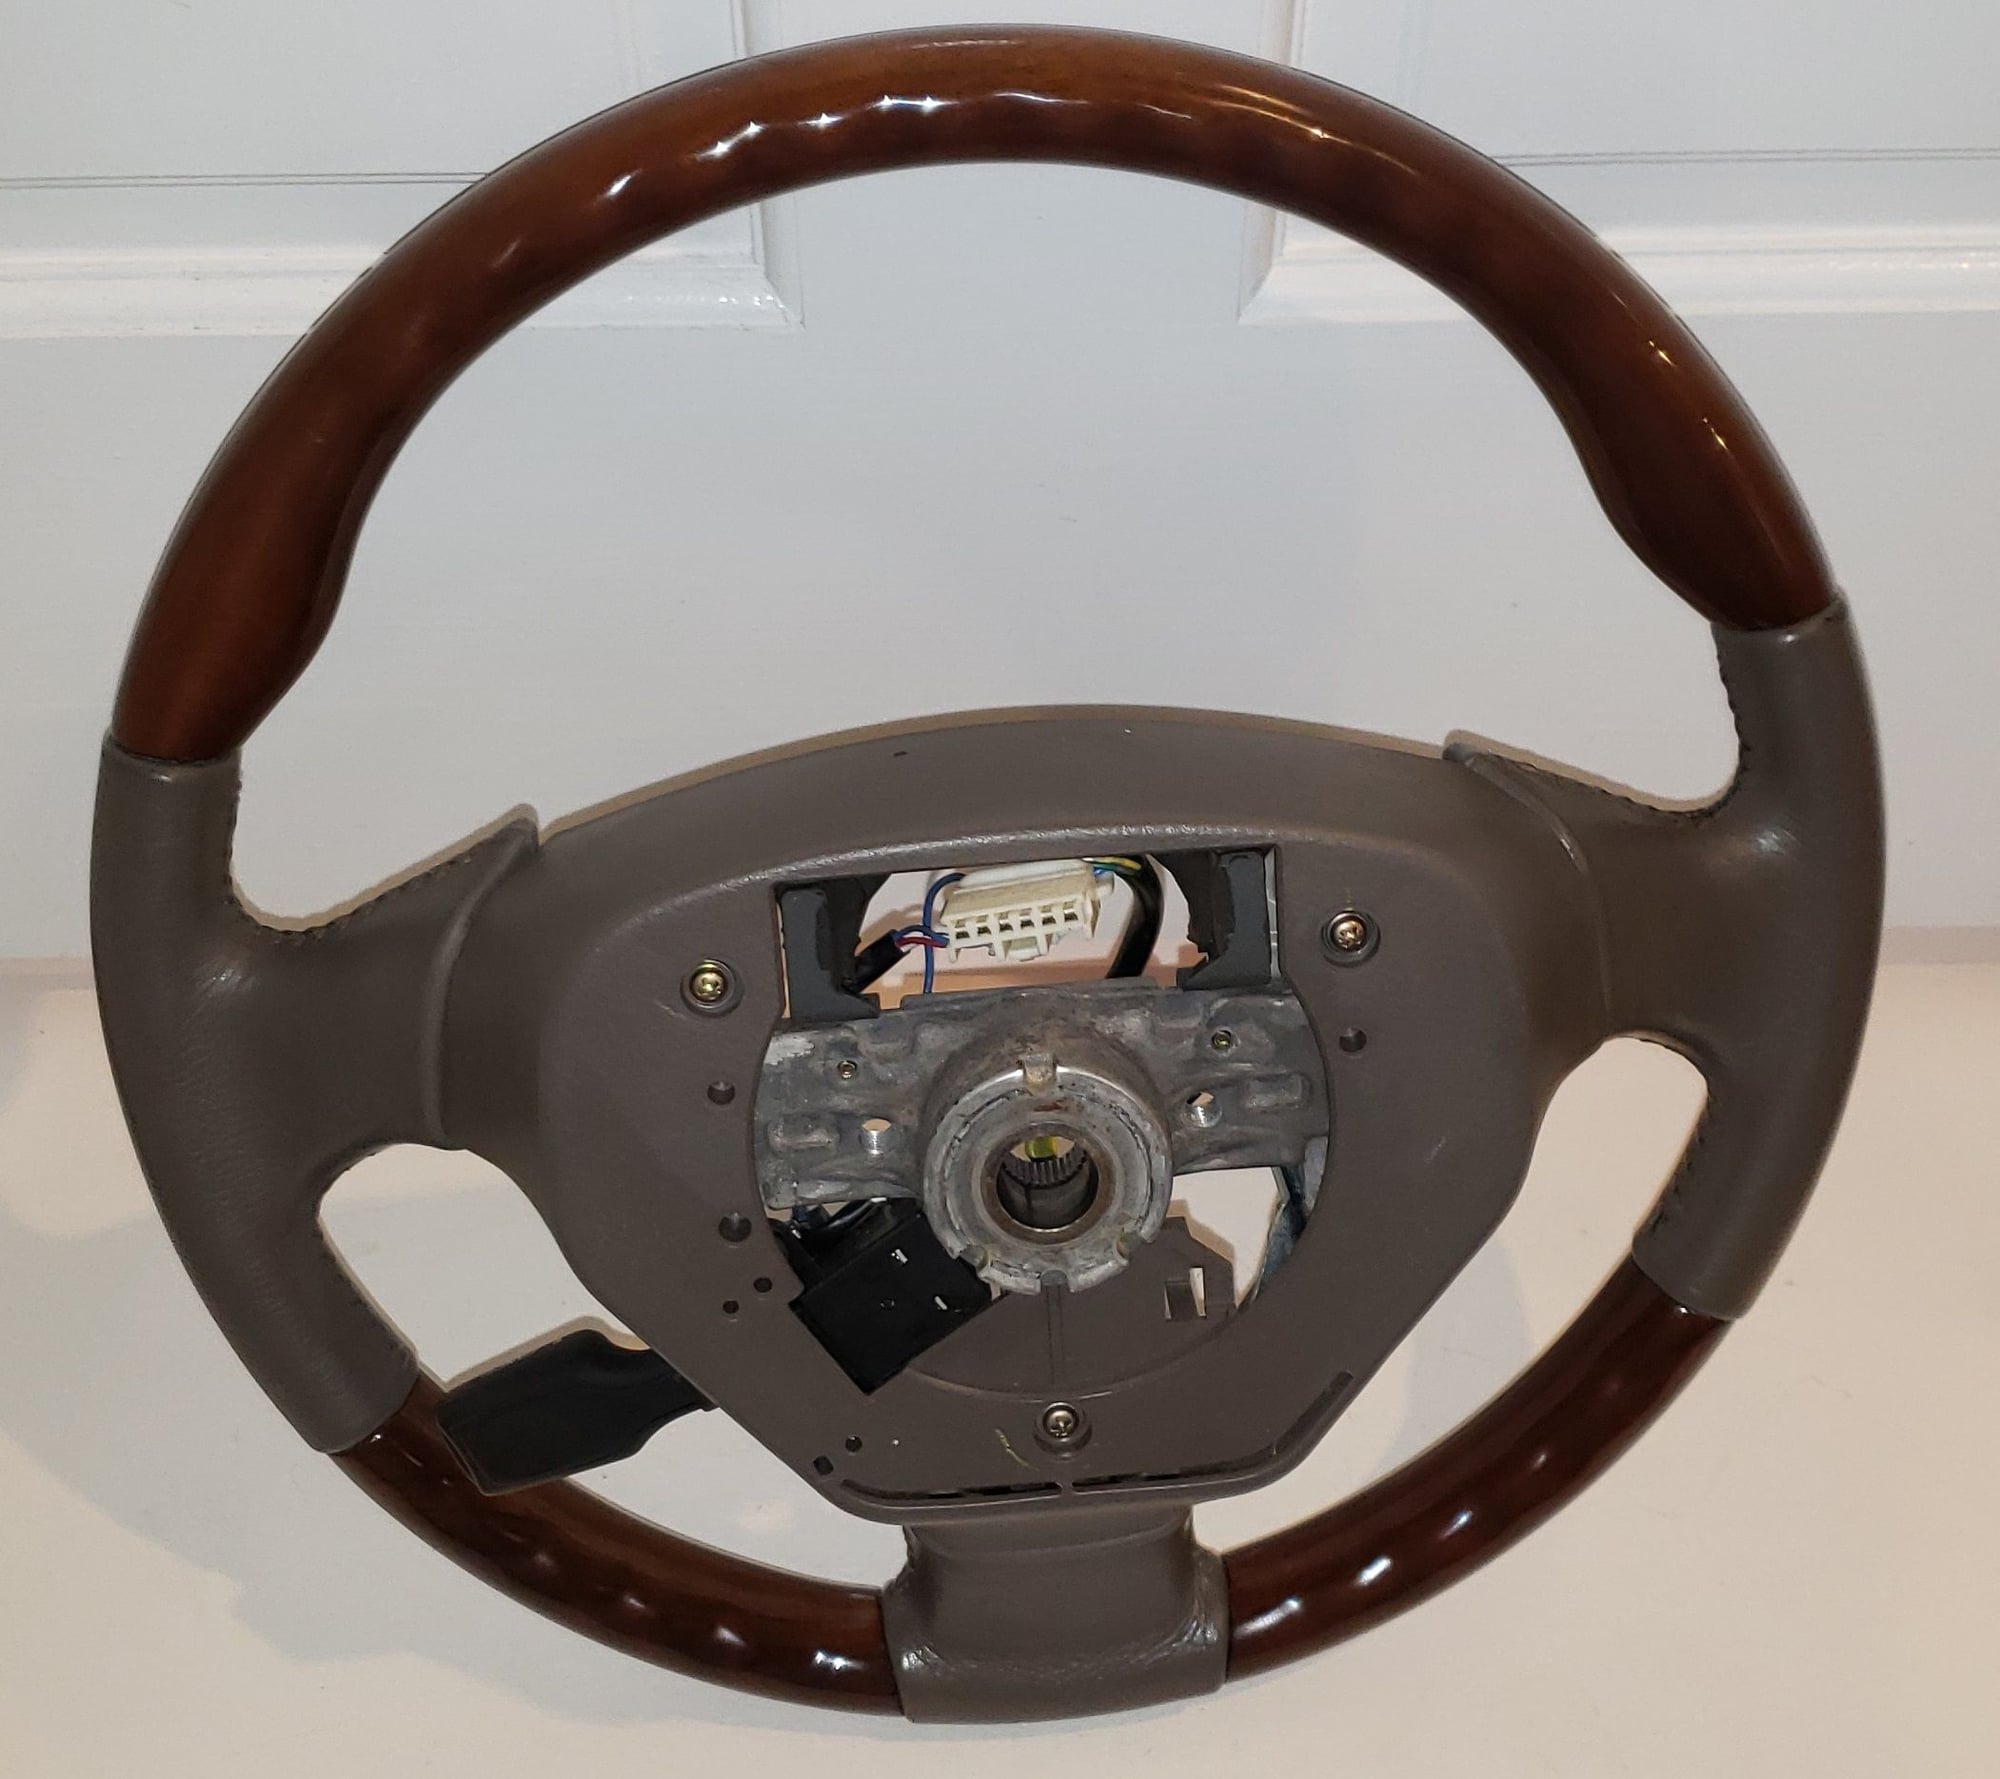 Interior/Upholstery - 2002 Lexus RX300 Streering Wheel - Wood & Leather - Used - 1999 to 2003 Lexus RX300 - 1998 to 2005 Lexus GS300 - 1998 to 2000 Lexus GS400 - 2001 to 2005 Lexus GS430 - Raleigh, NC 27612, United States